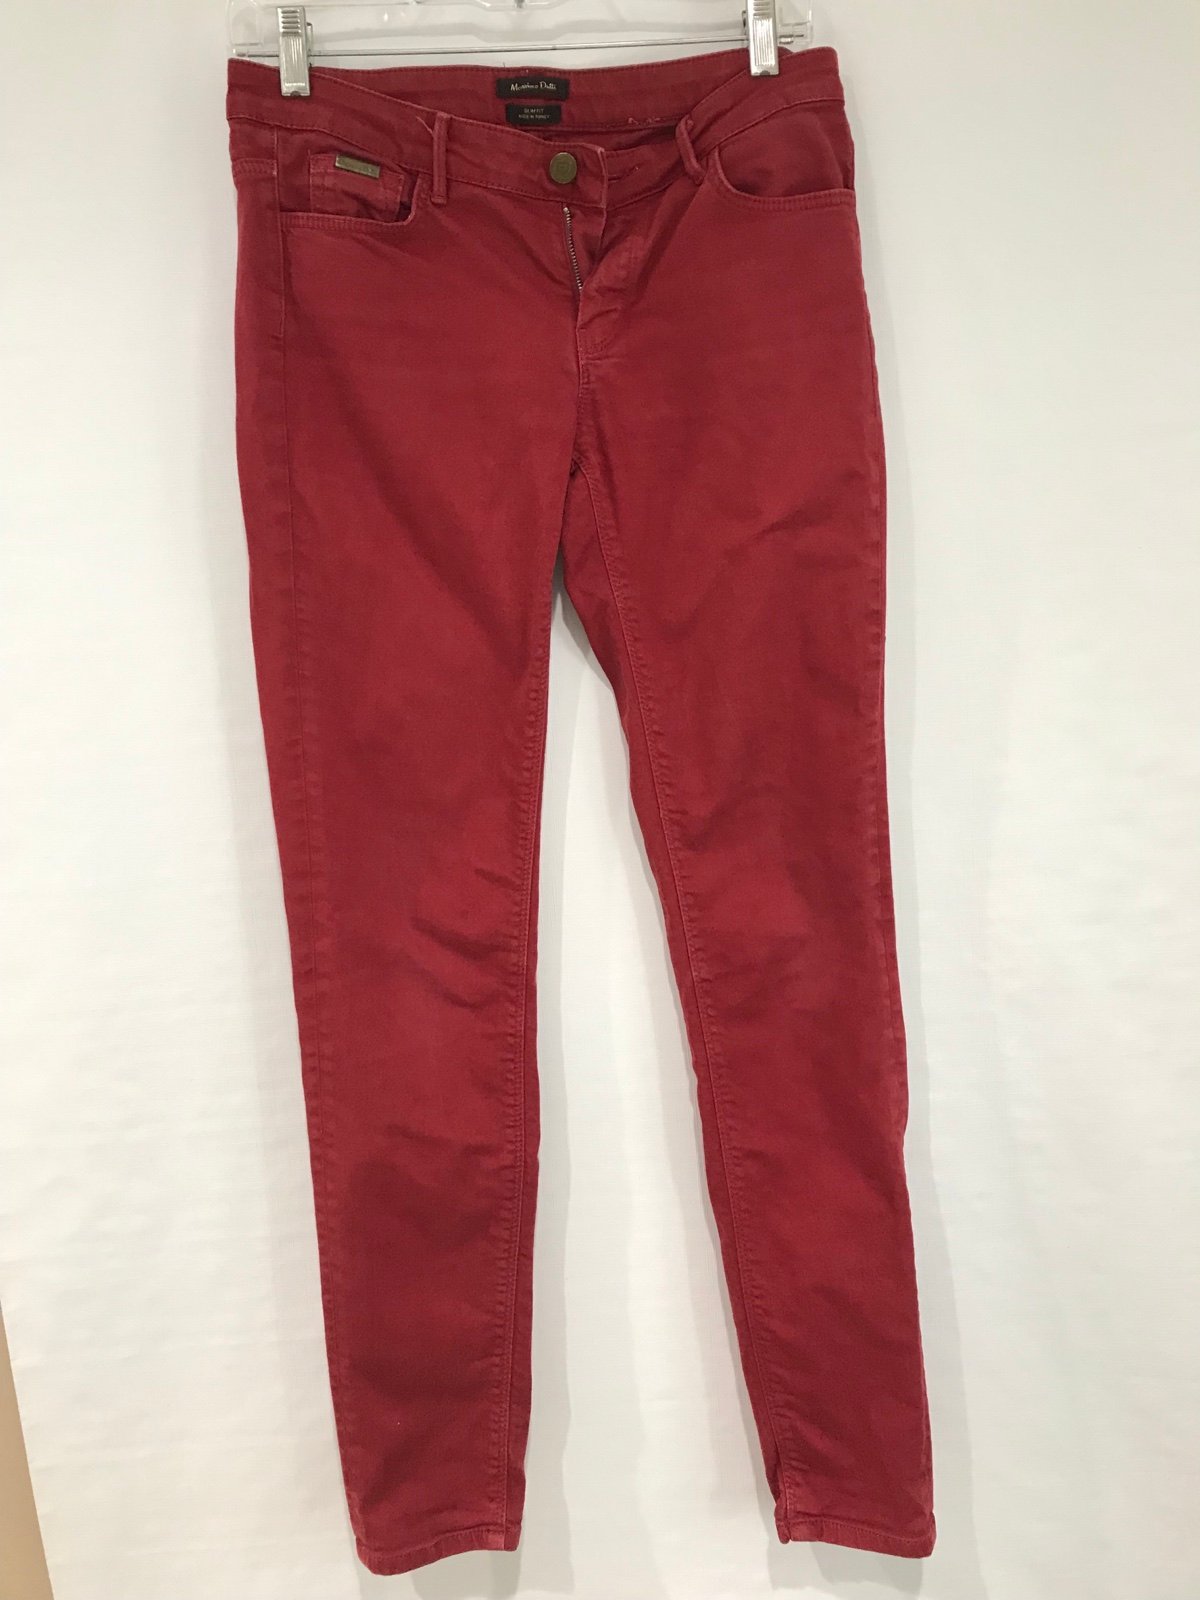 Simple Massimo Dutti Woman’s Slim Fit Jeans, Size 4 JqH4bxvy1 Factory Price